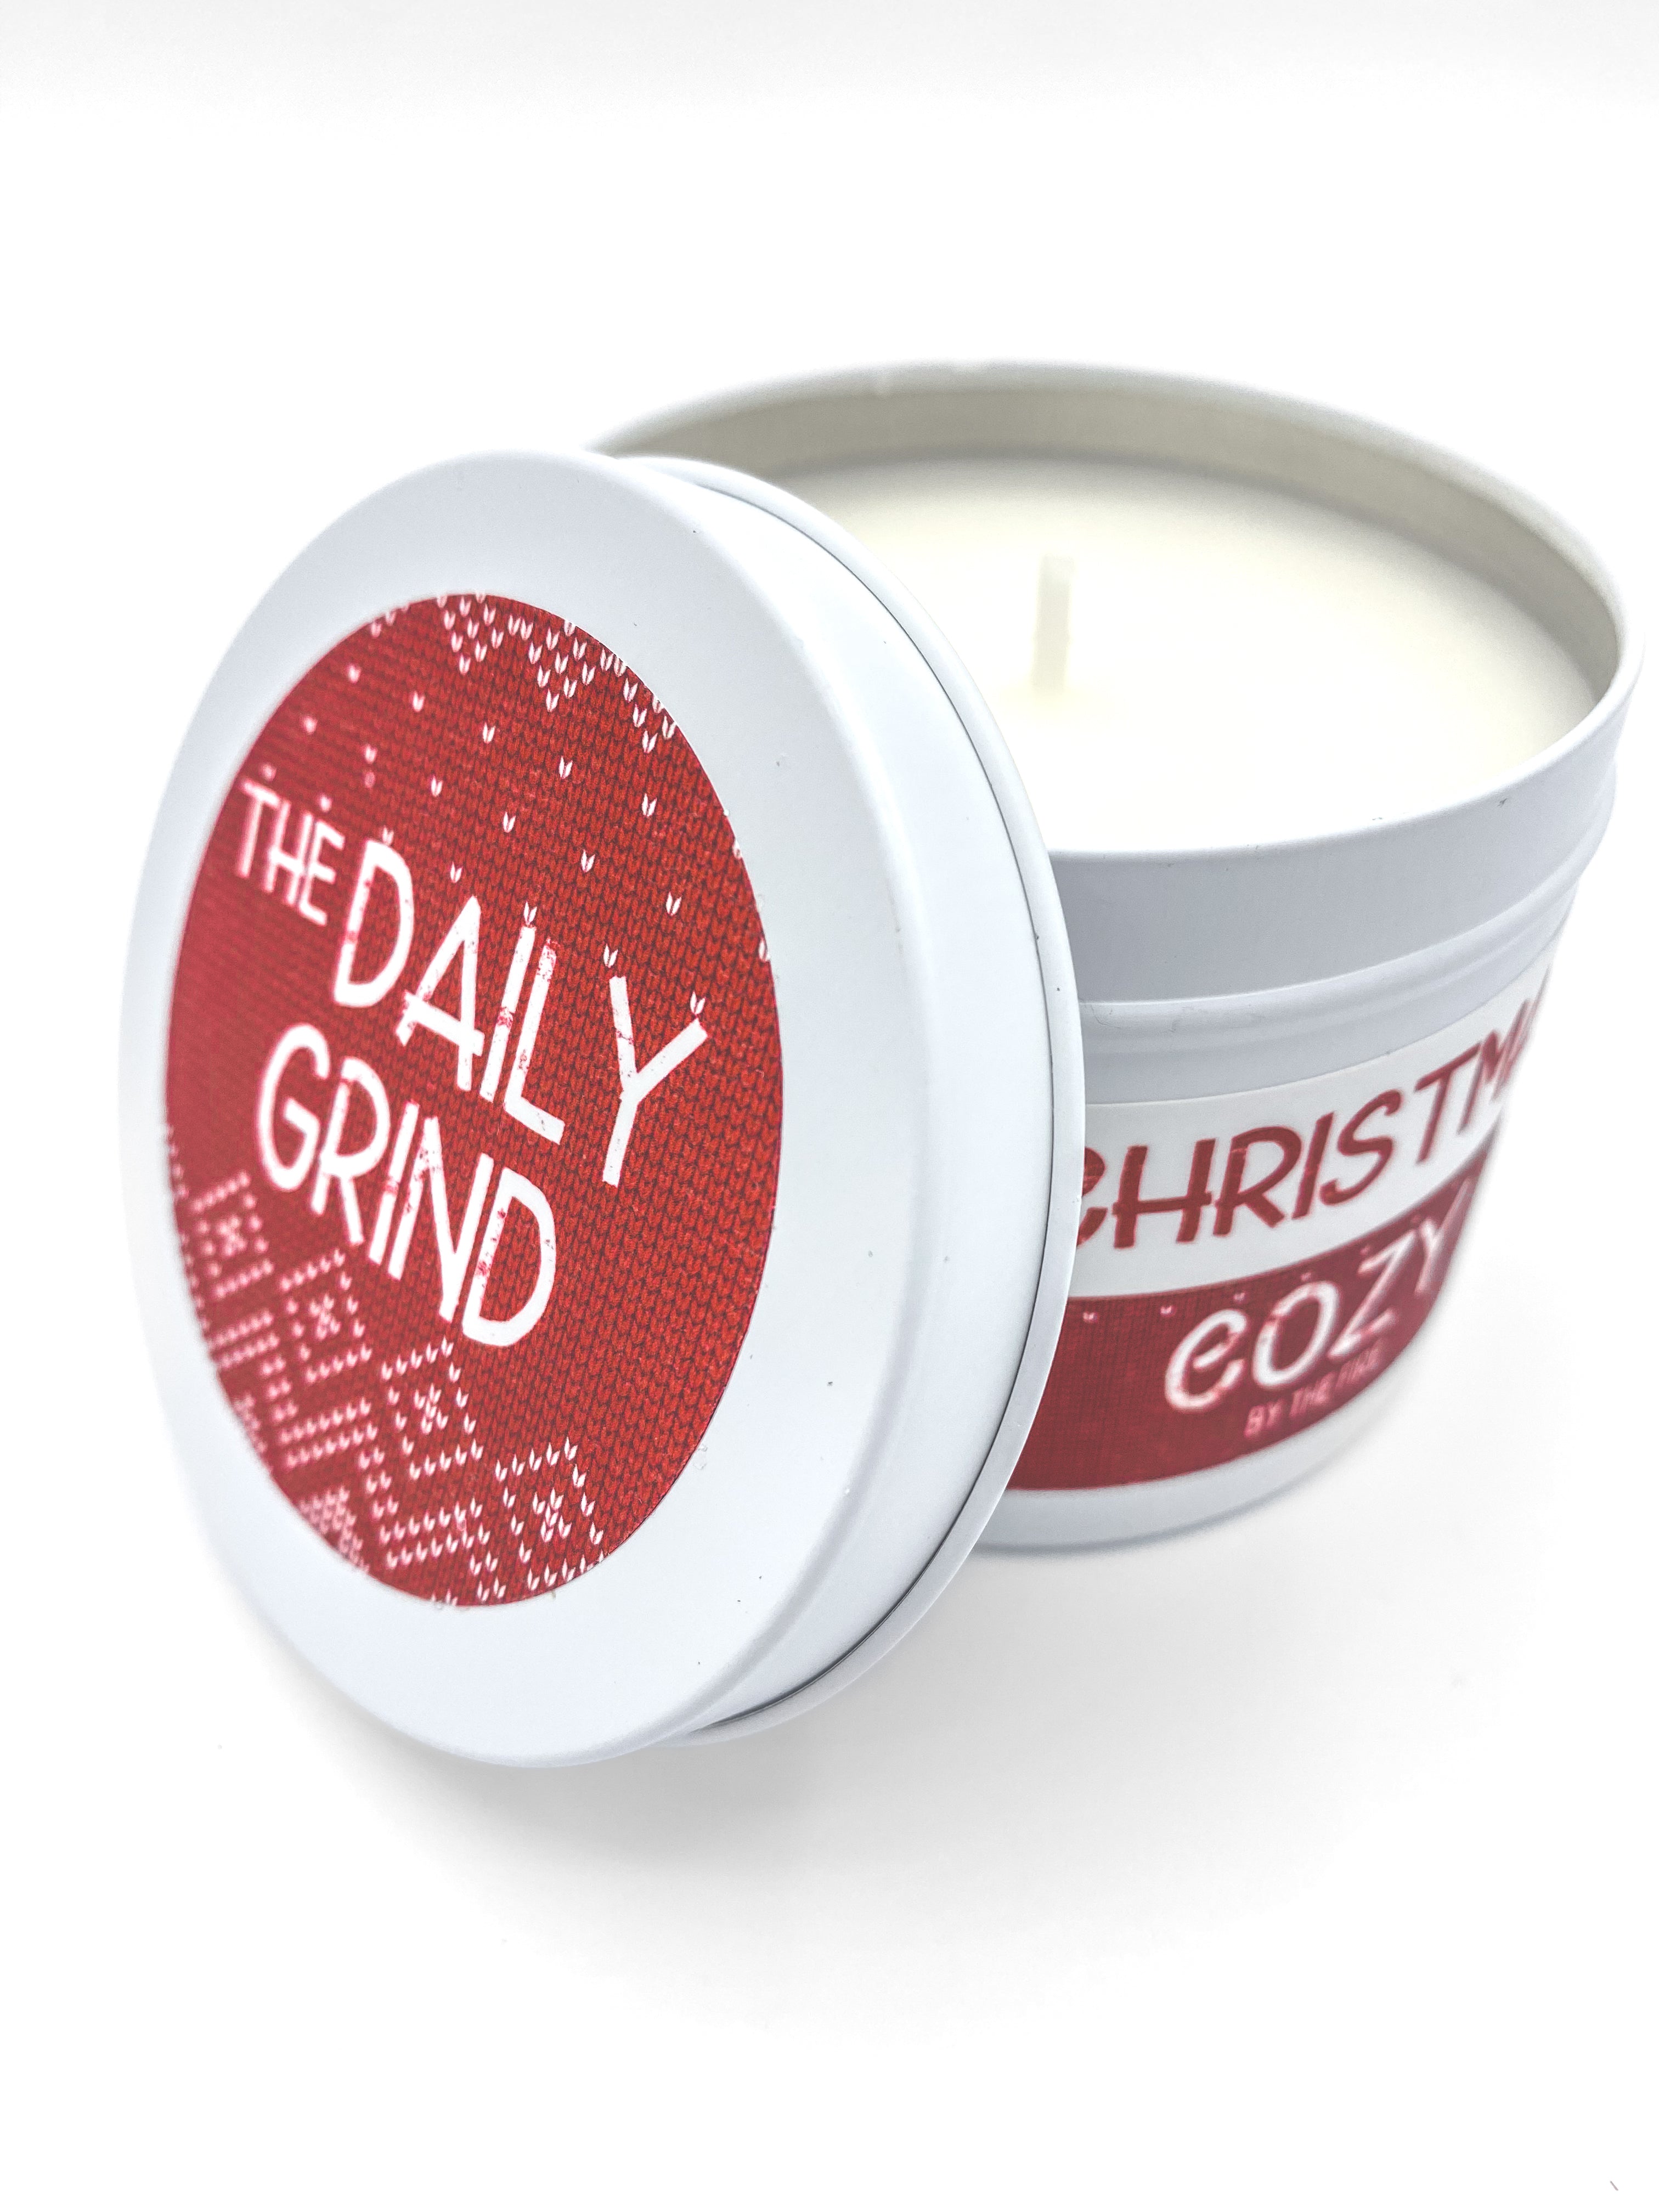 THE DAILY HOME | Christmas Cozy Candle